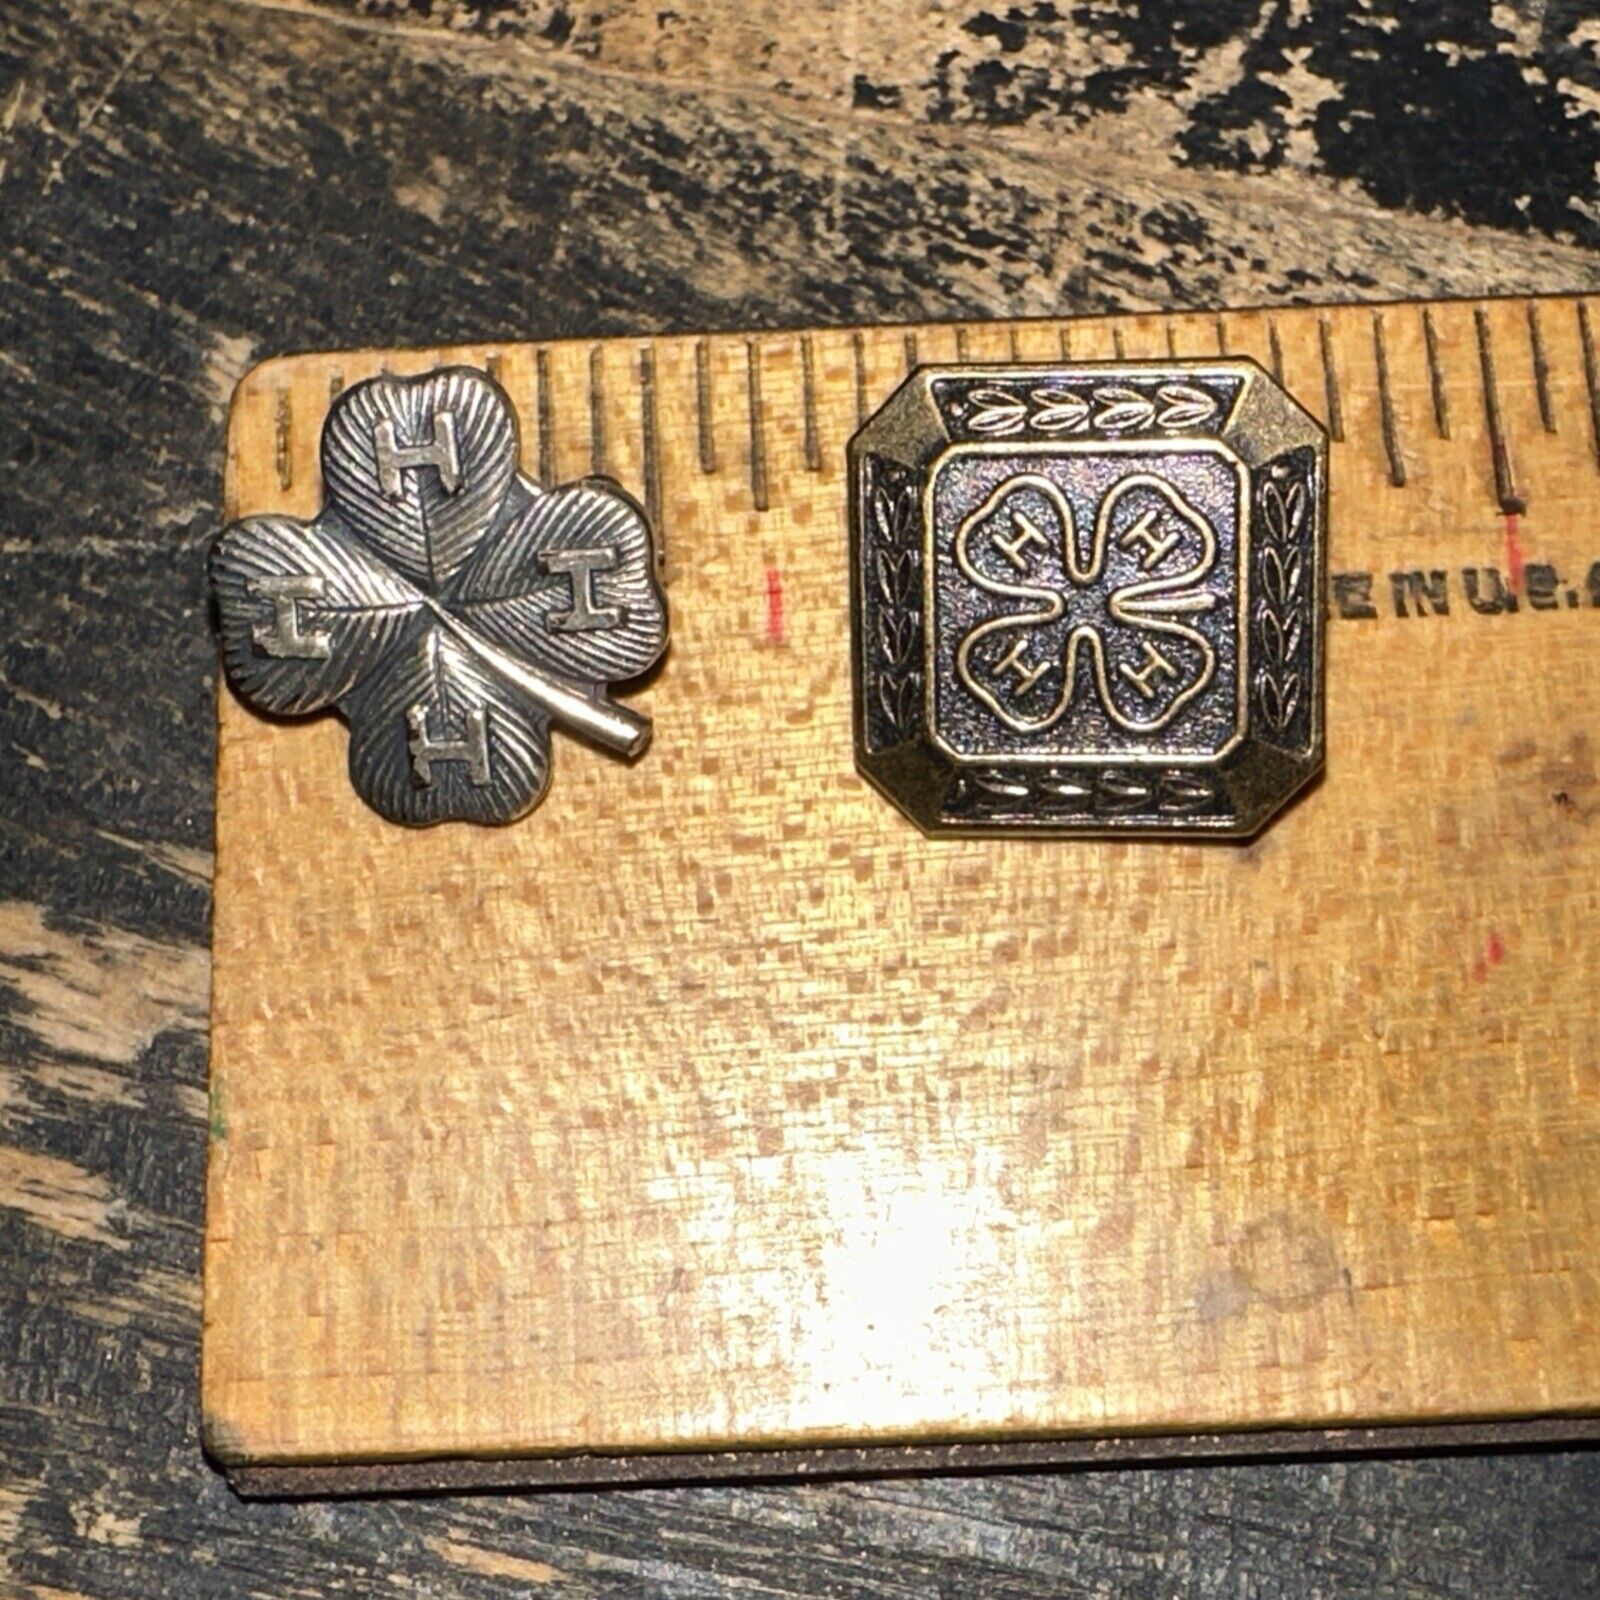 2 Vintage 4-H Lapel Pins, 1 marked “Sterling”